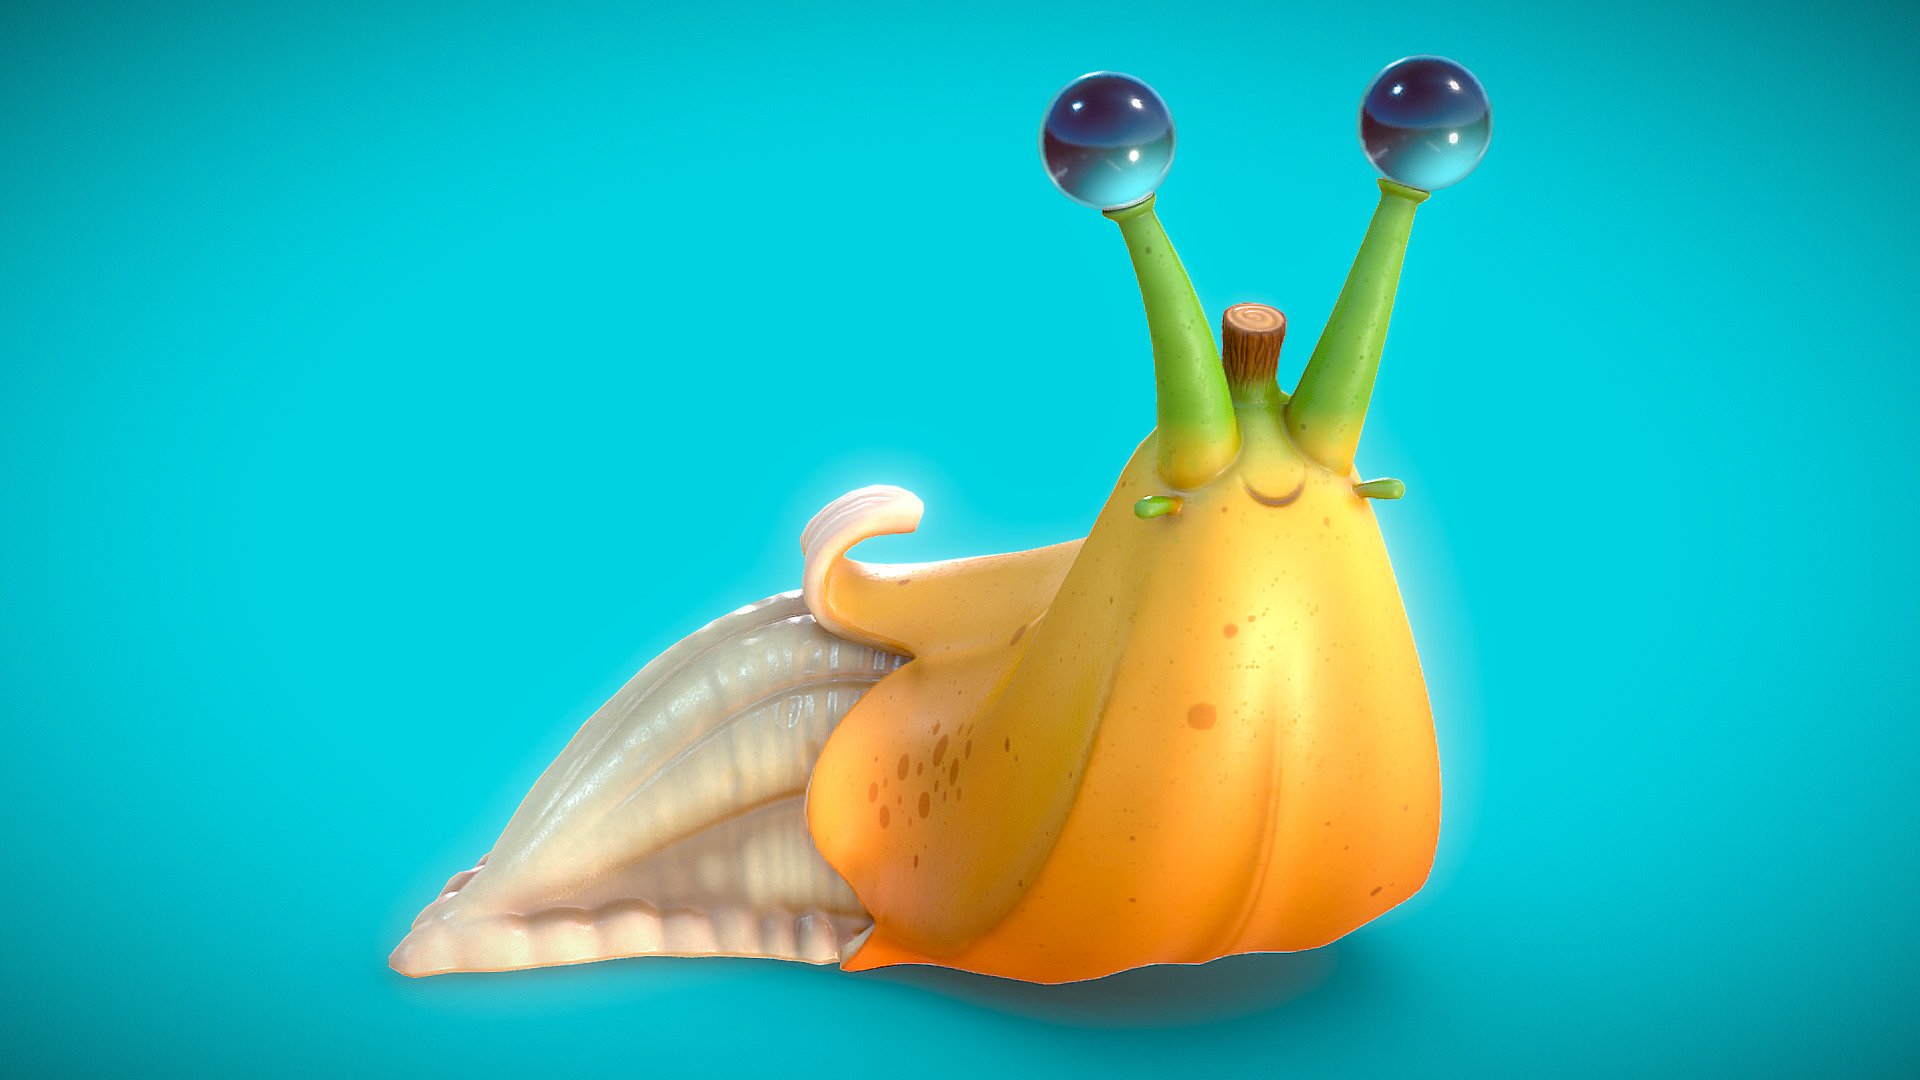 HNY 2023 guys :). This is a Banana Slug based on a concept by Piper Thibodeau . This szene is done with a 2048x2048 pbr material.

More renderings - Banana Slug - 3D model by Sebastian Irmer (@.sebastian.) 3d model